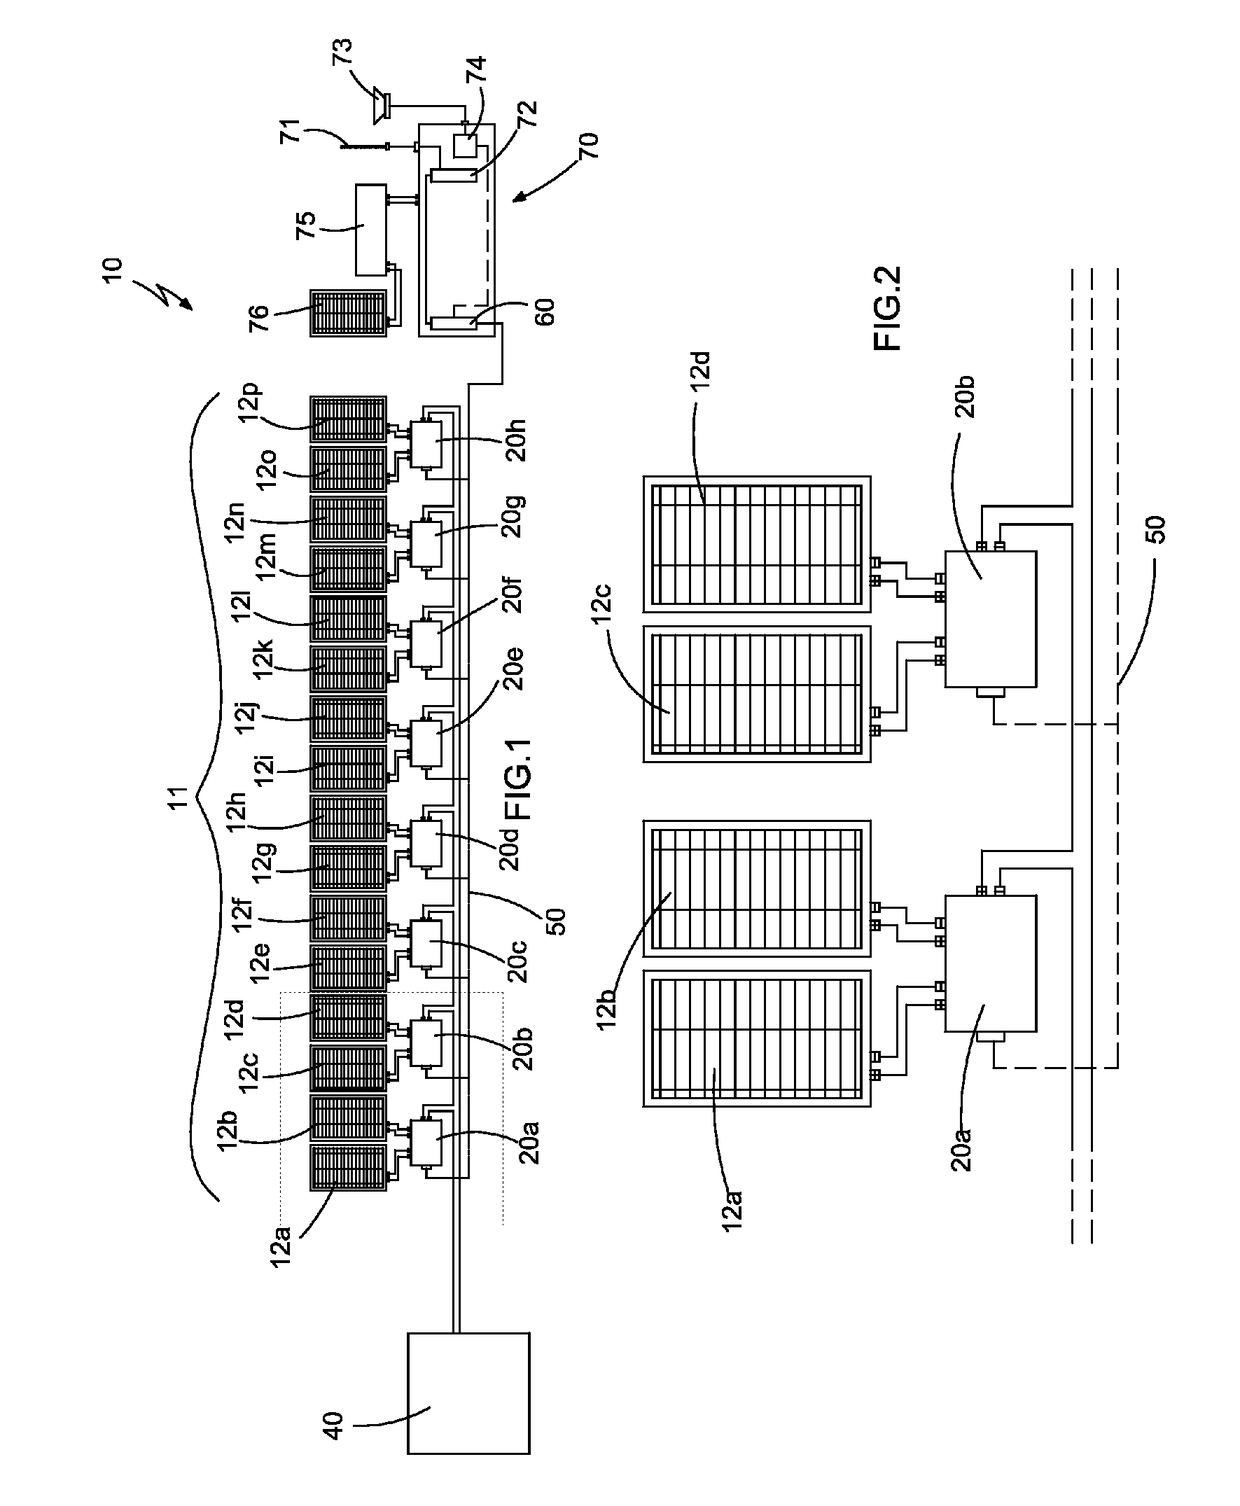 Apparatus and method for managing and conditioning photovoltaic power harvesting systems